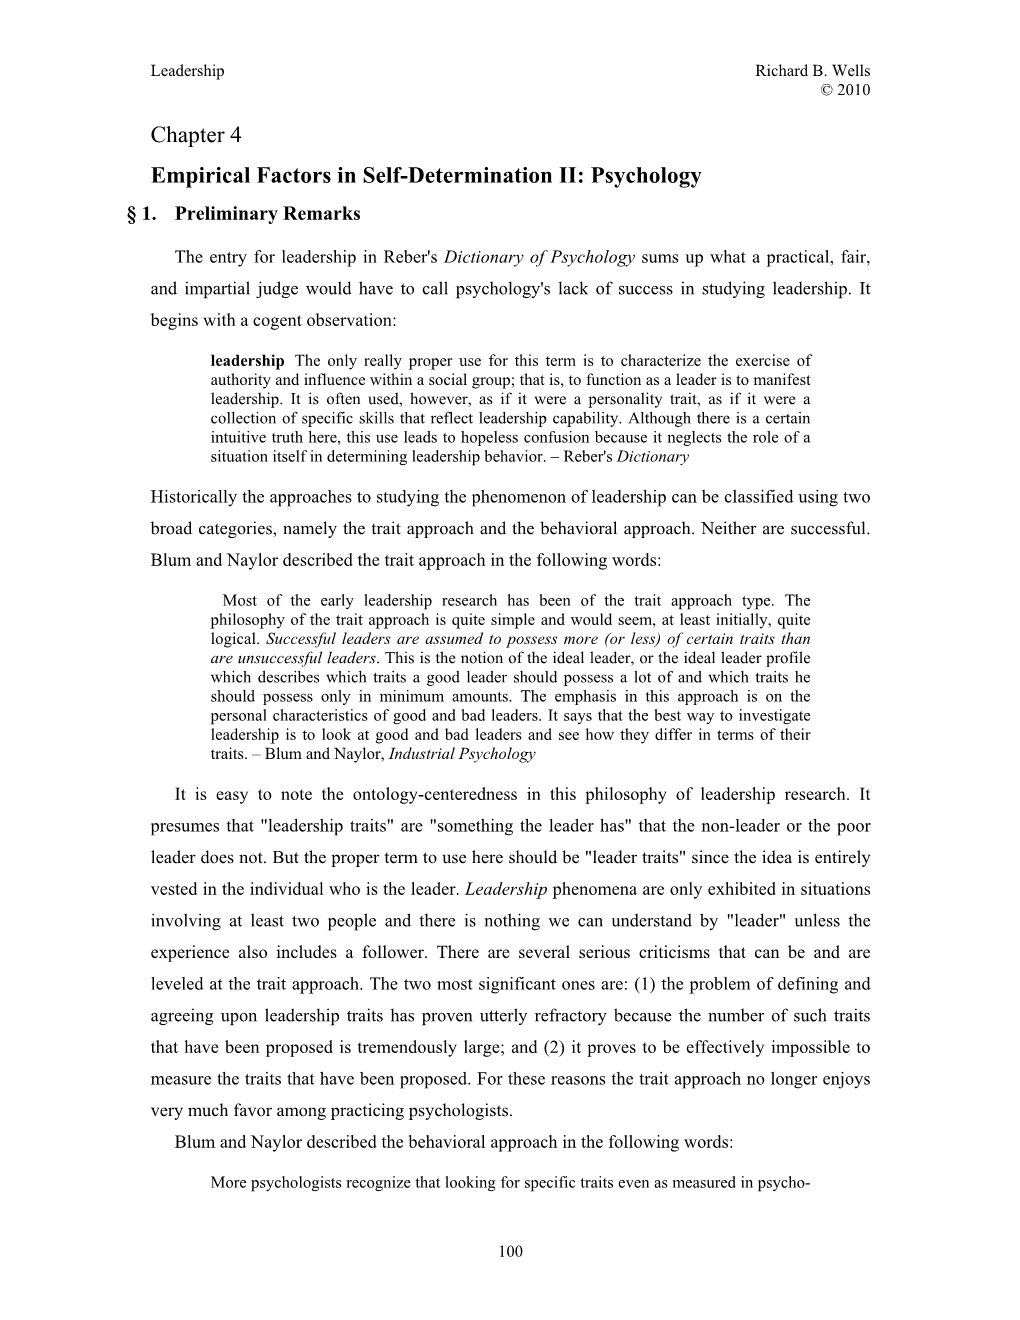 Chapter 4 Empirical Factors in Self-Determination II: Psychology § 1